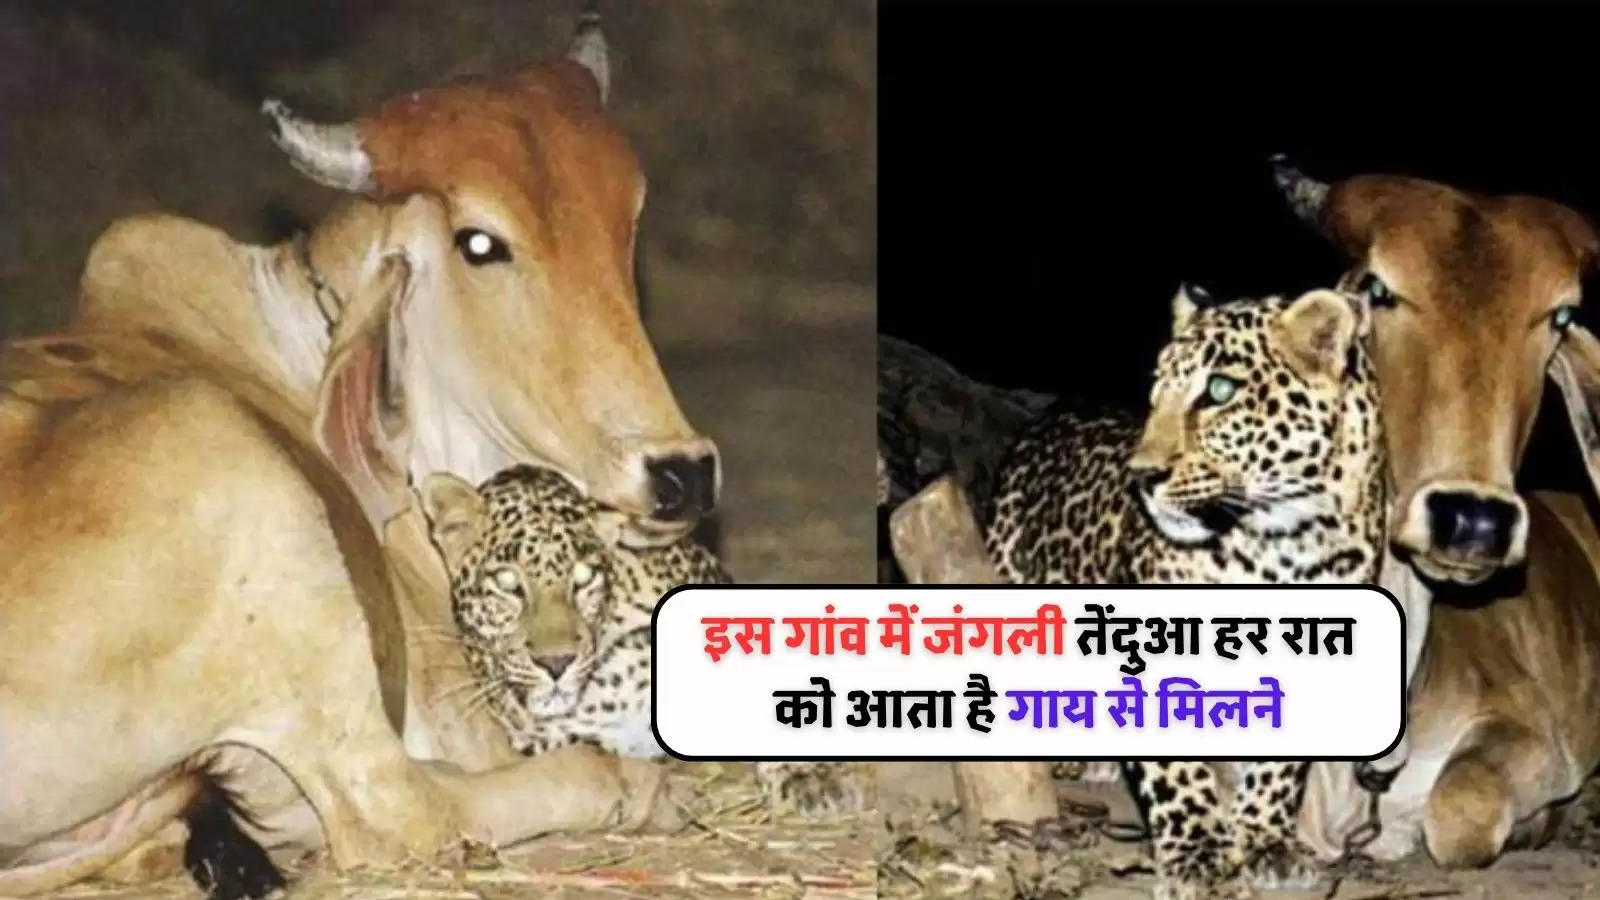 Leopard comes to meet the cow